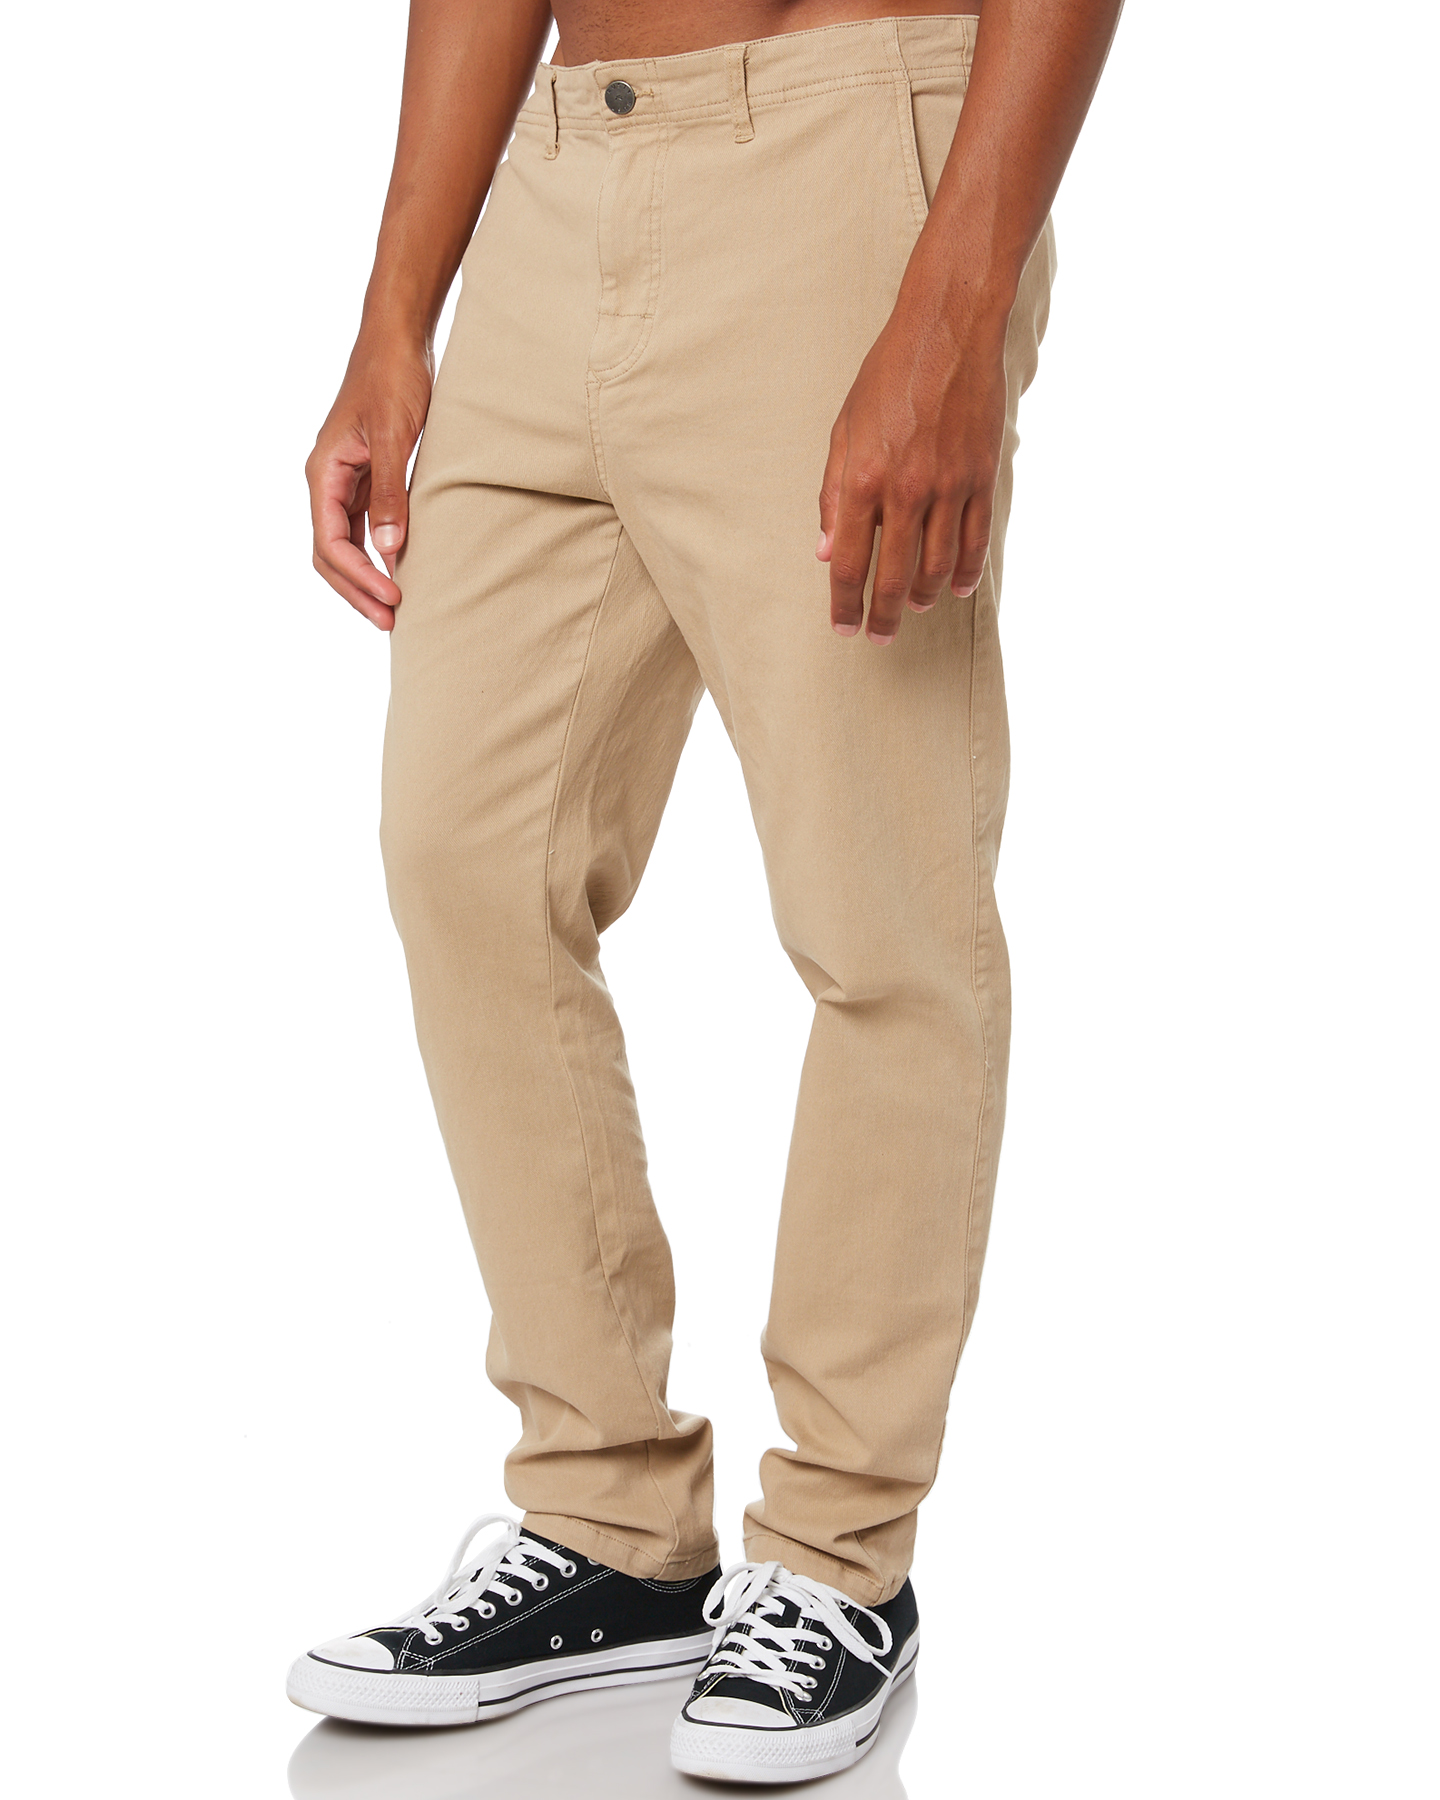 Rusty The John Mens Chino Pant - Fennel | SurfStitch